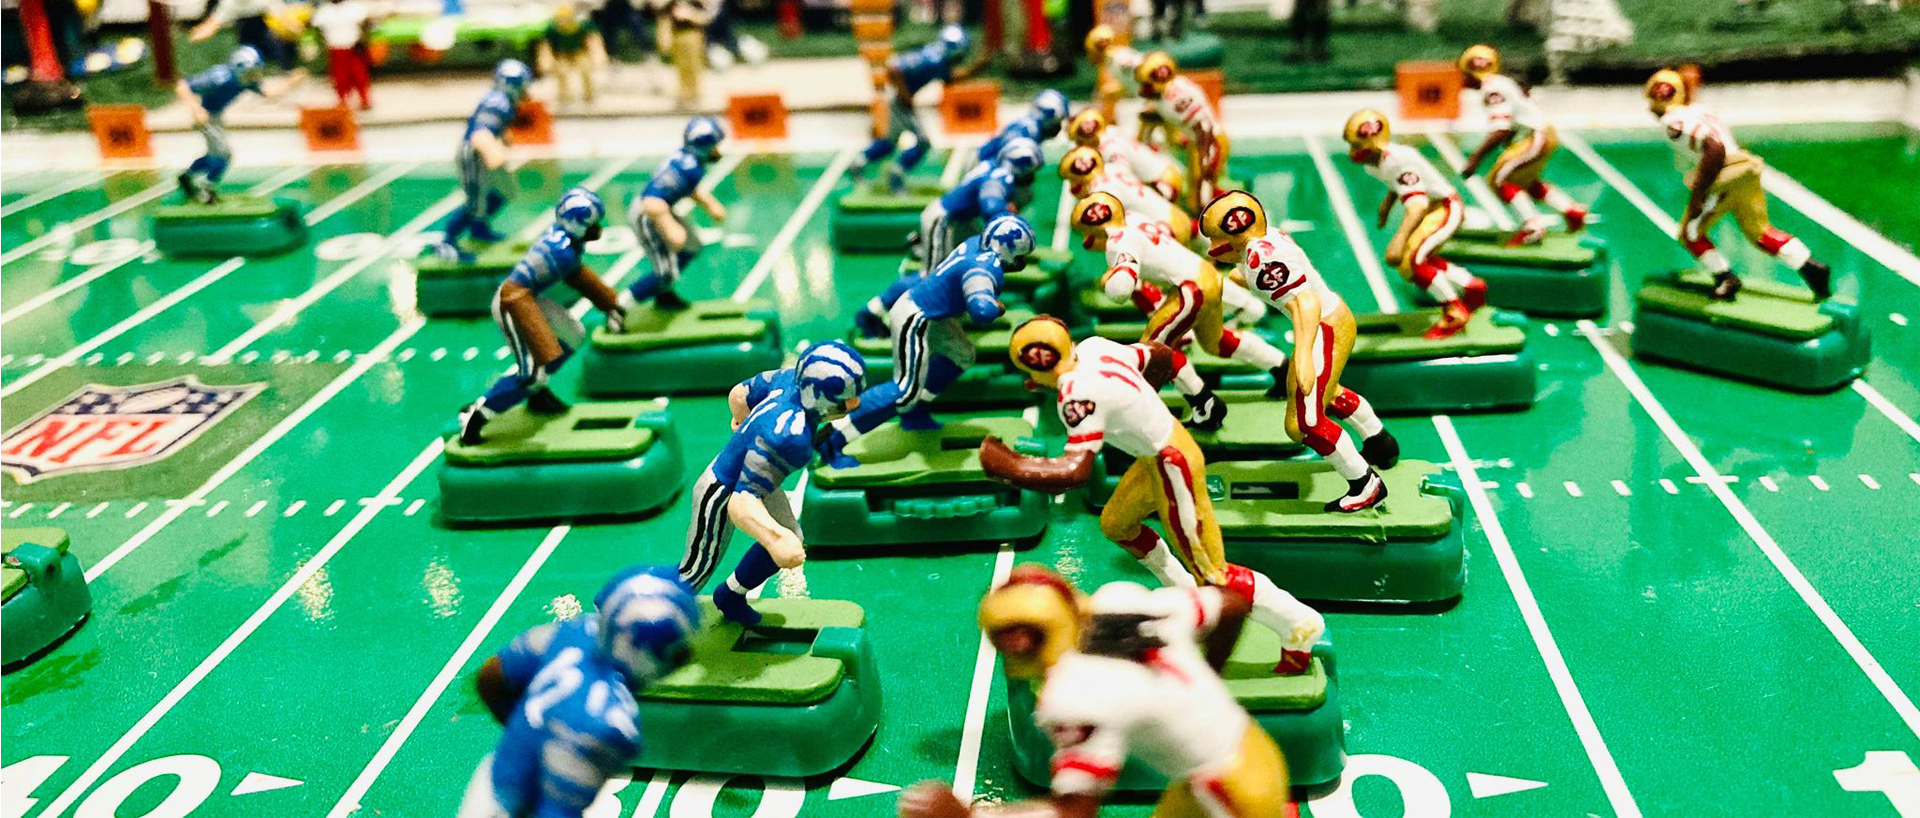 electric football board with players